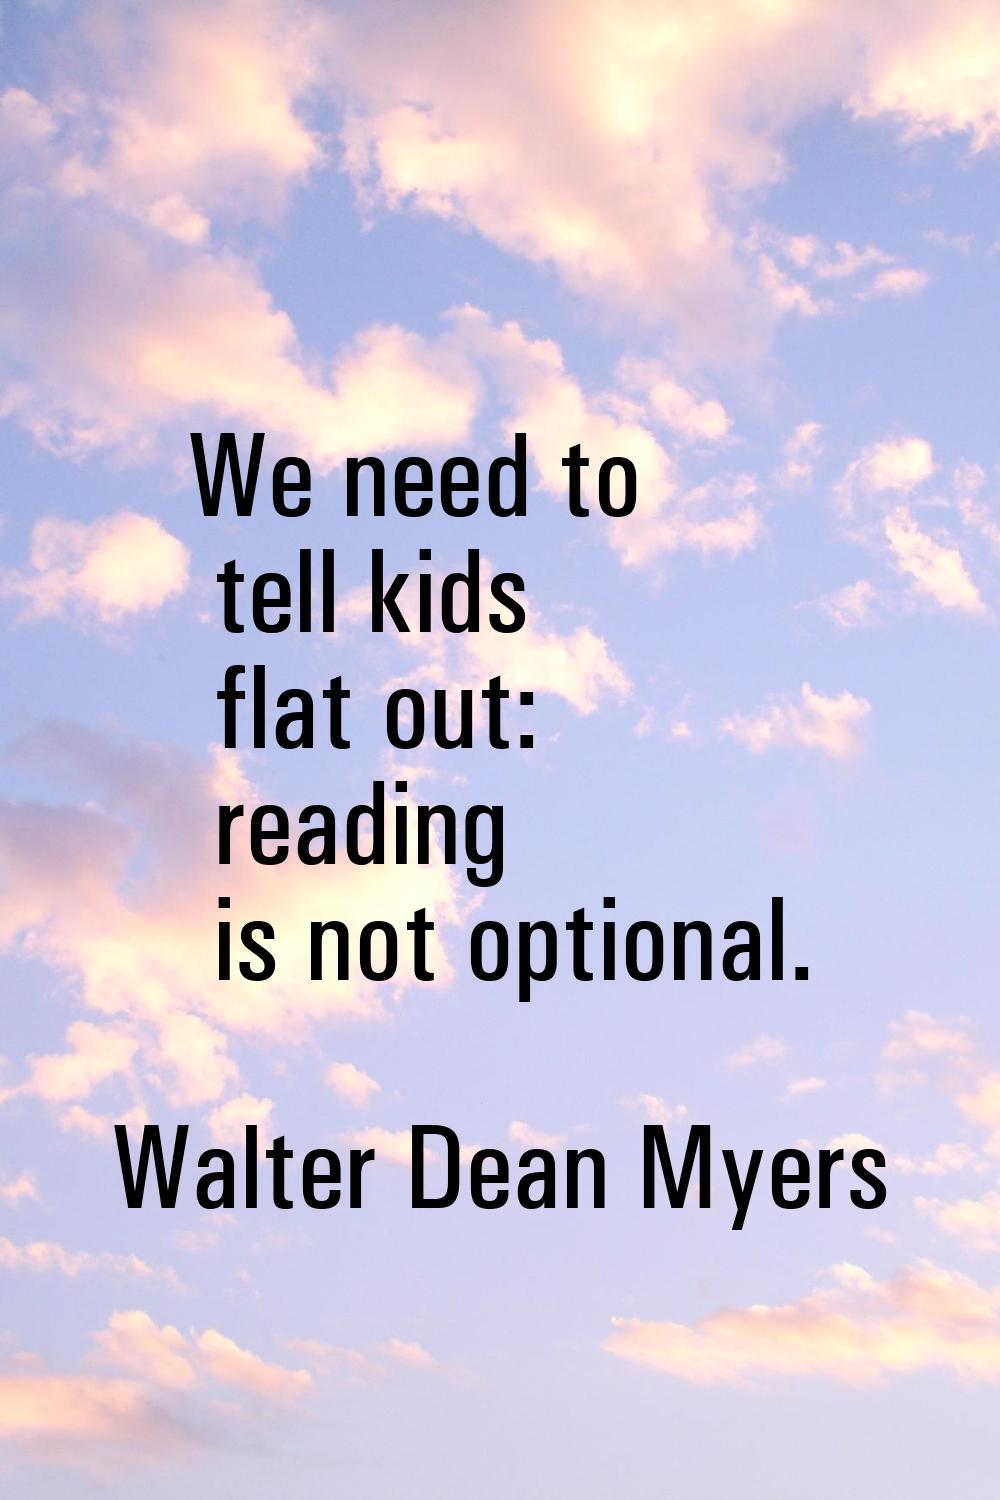 We need to tell kids flat out: reading is not optional.